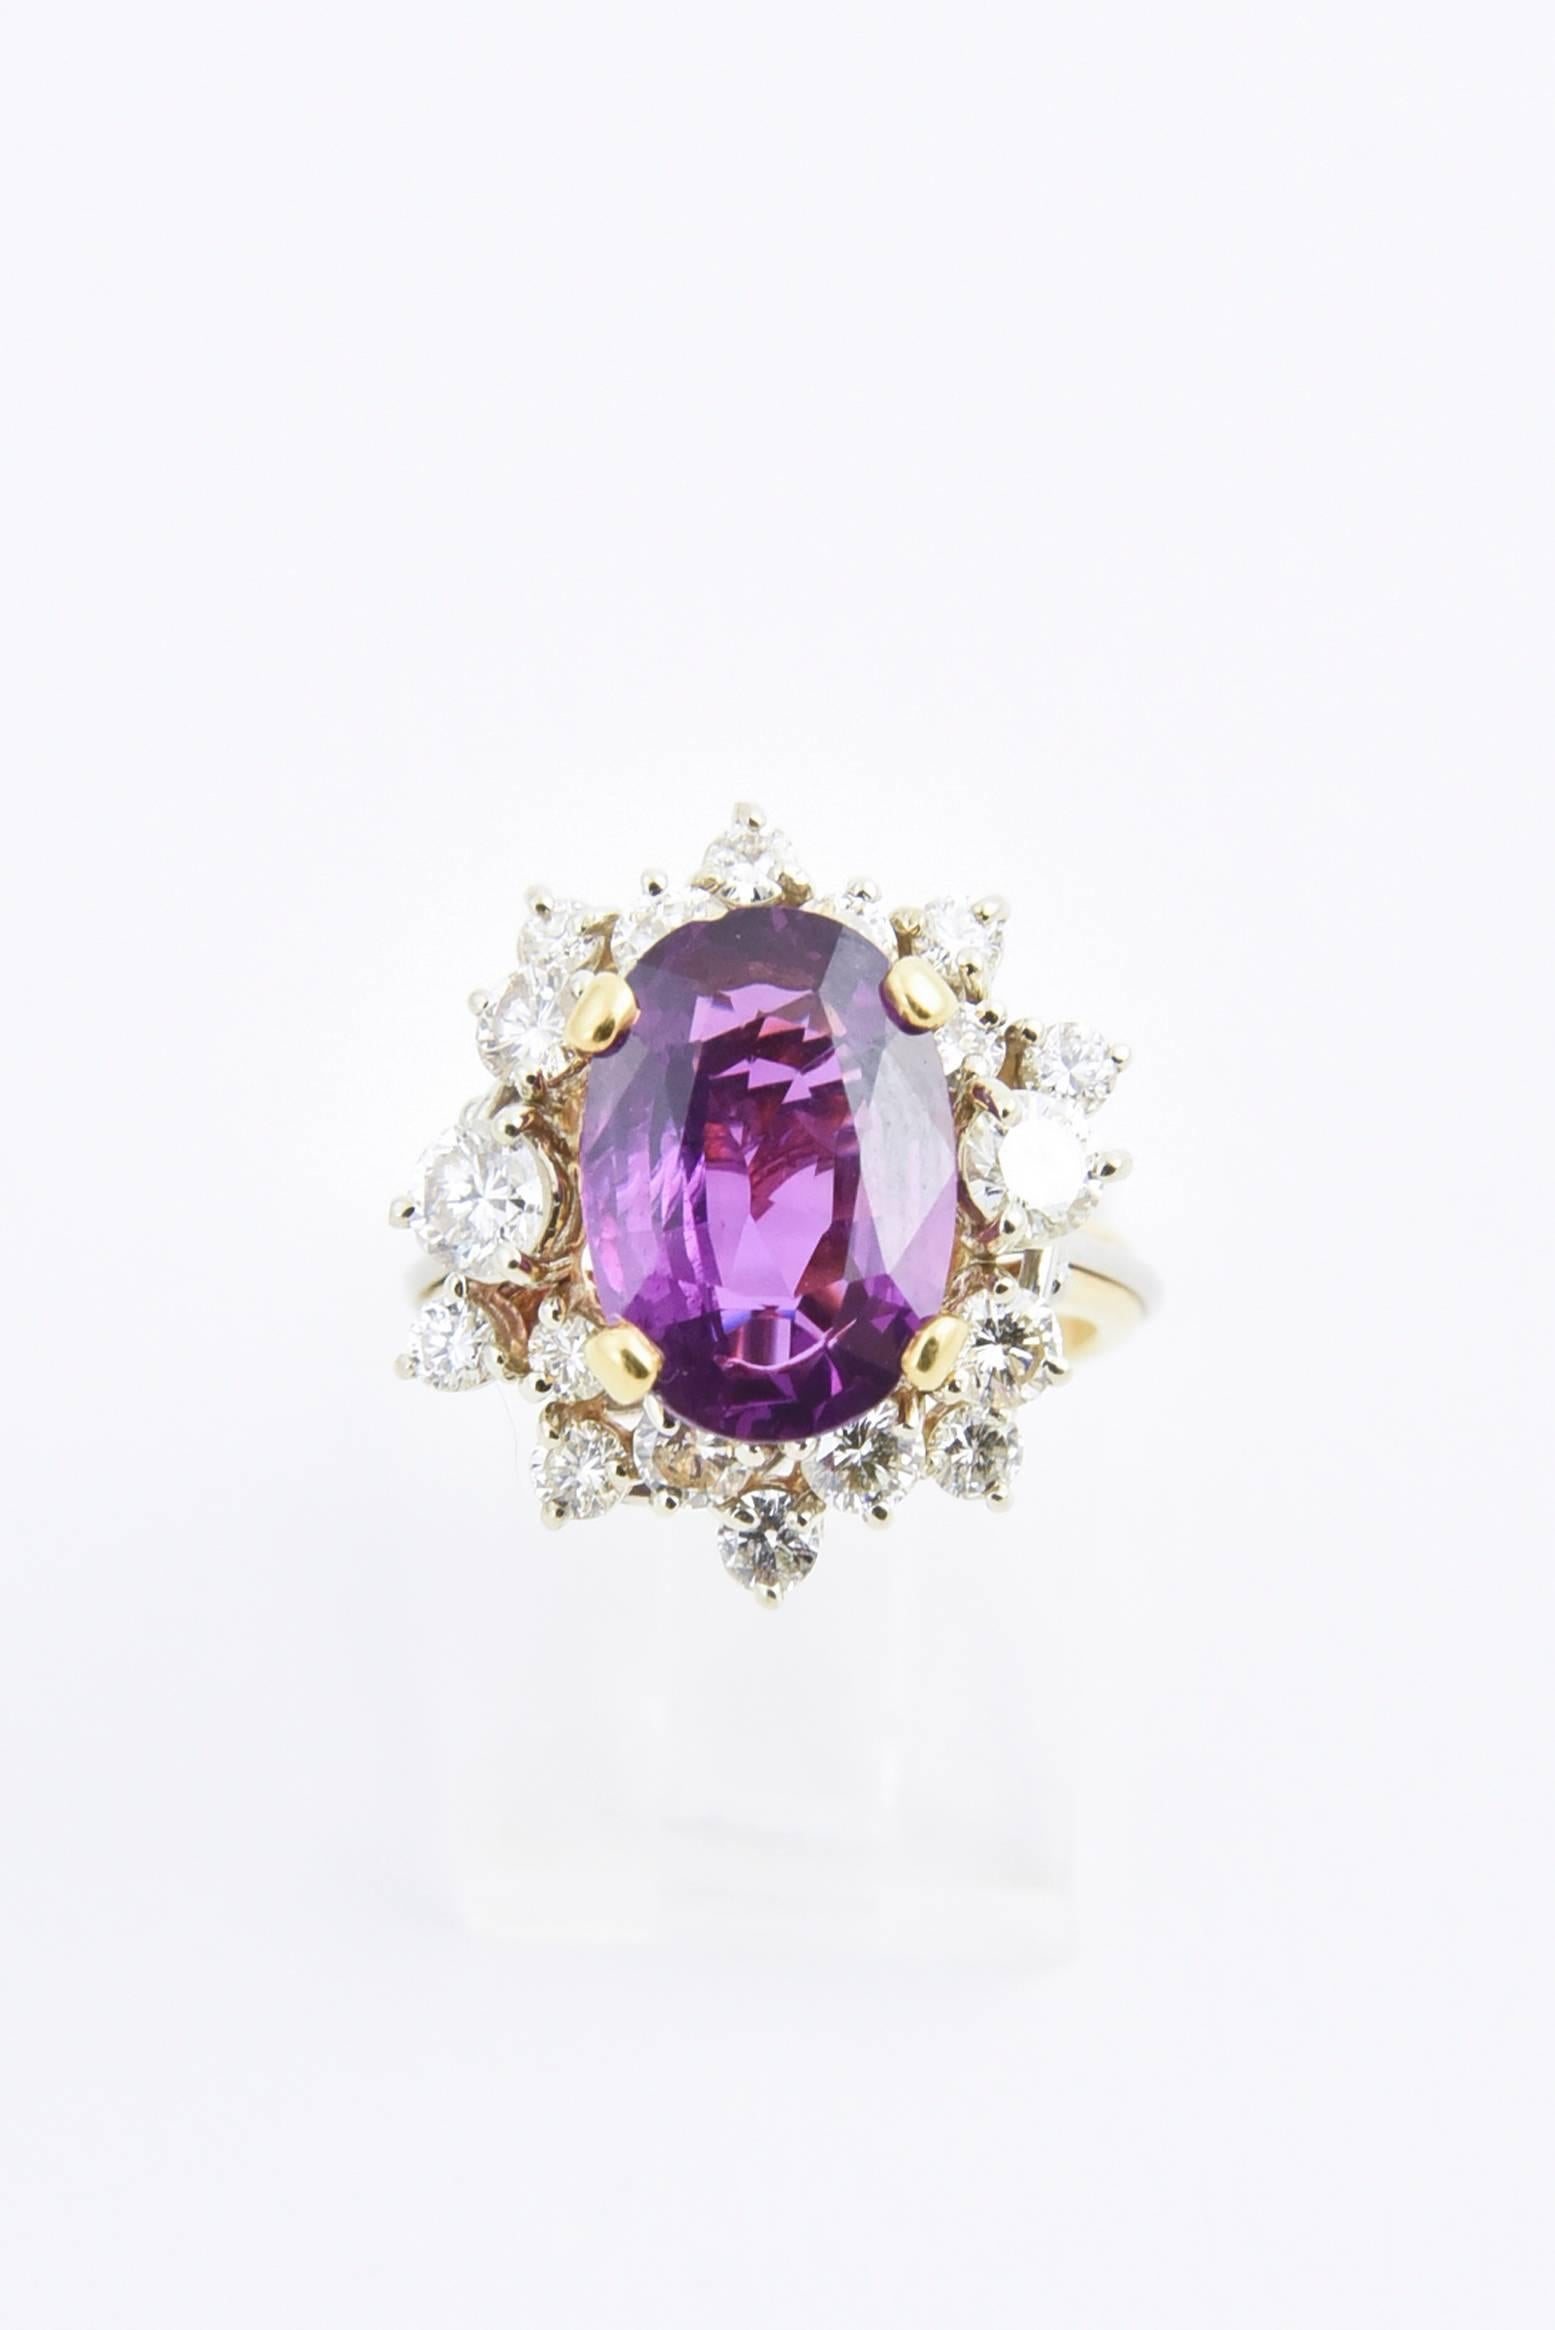 Glamorous sapphire and diamond cluster ring containing an oval pinkish purple sapphire weighing approximately 4 carats set amongst 18 diamonds that weight approximately 1.5 carats. Mounted in a 18k white and yellow gold ring with a scroll design on